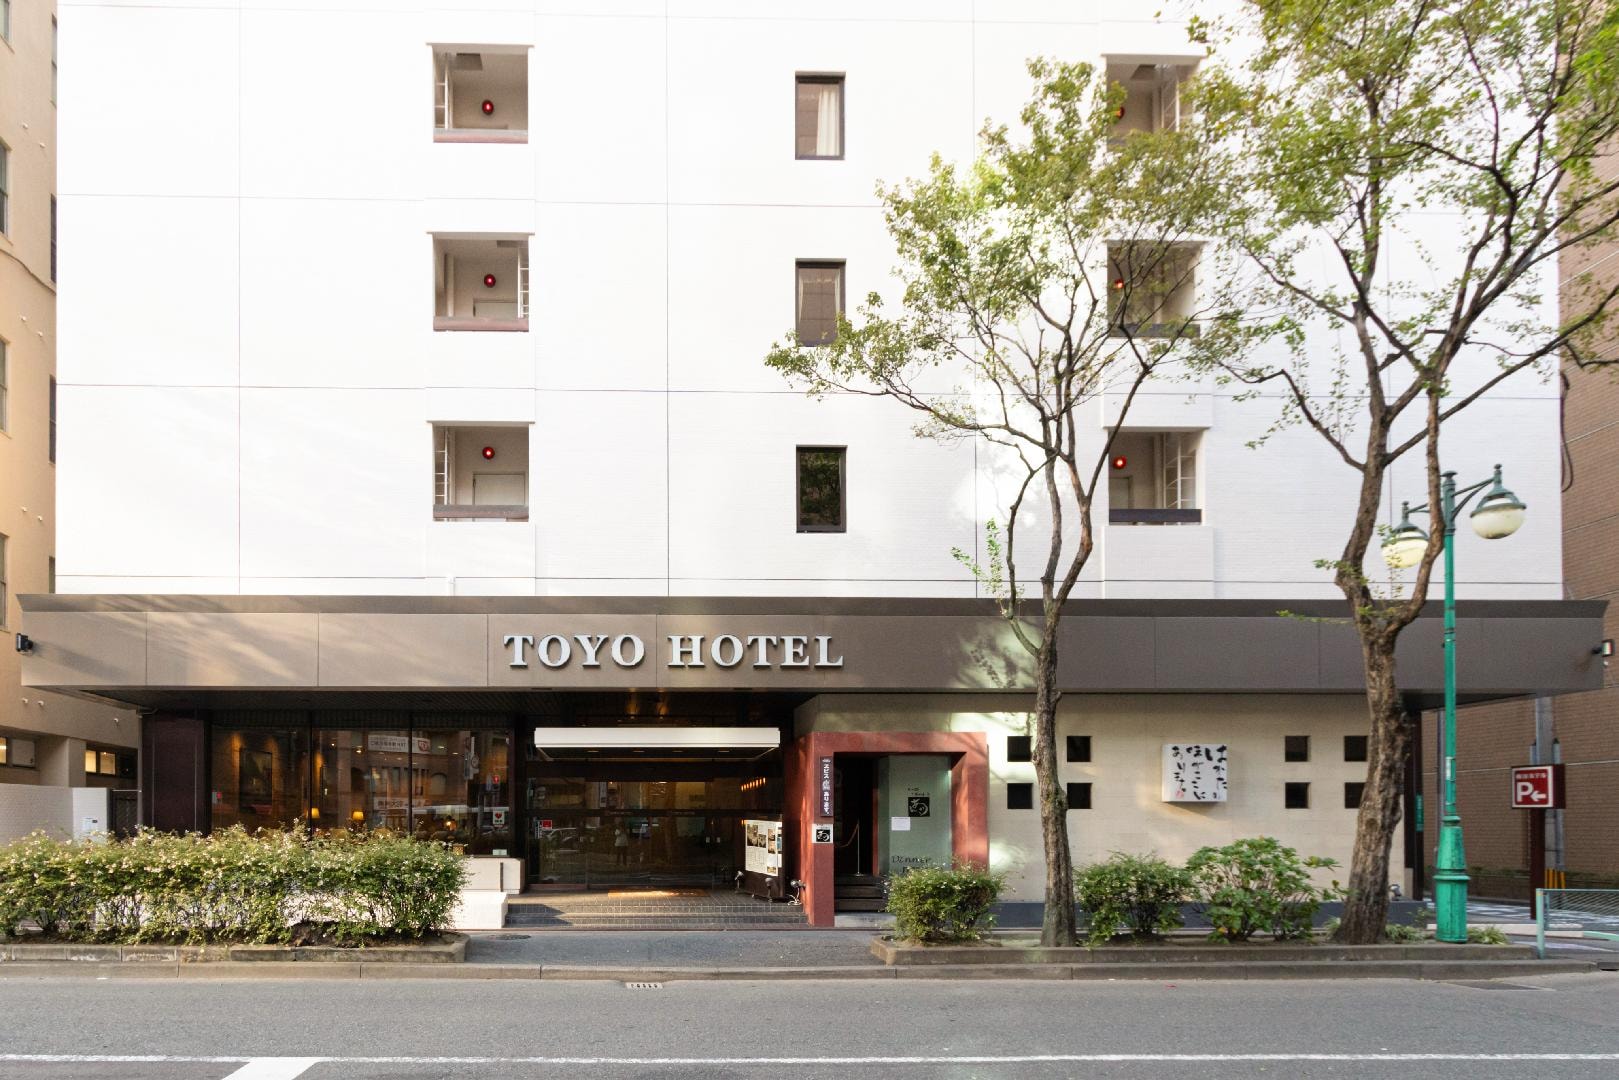 TOYOHOTEL (appearance)